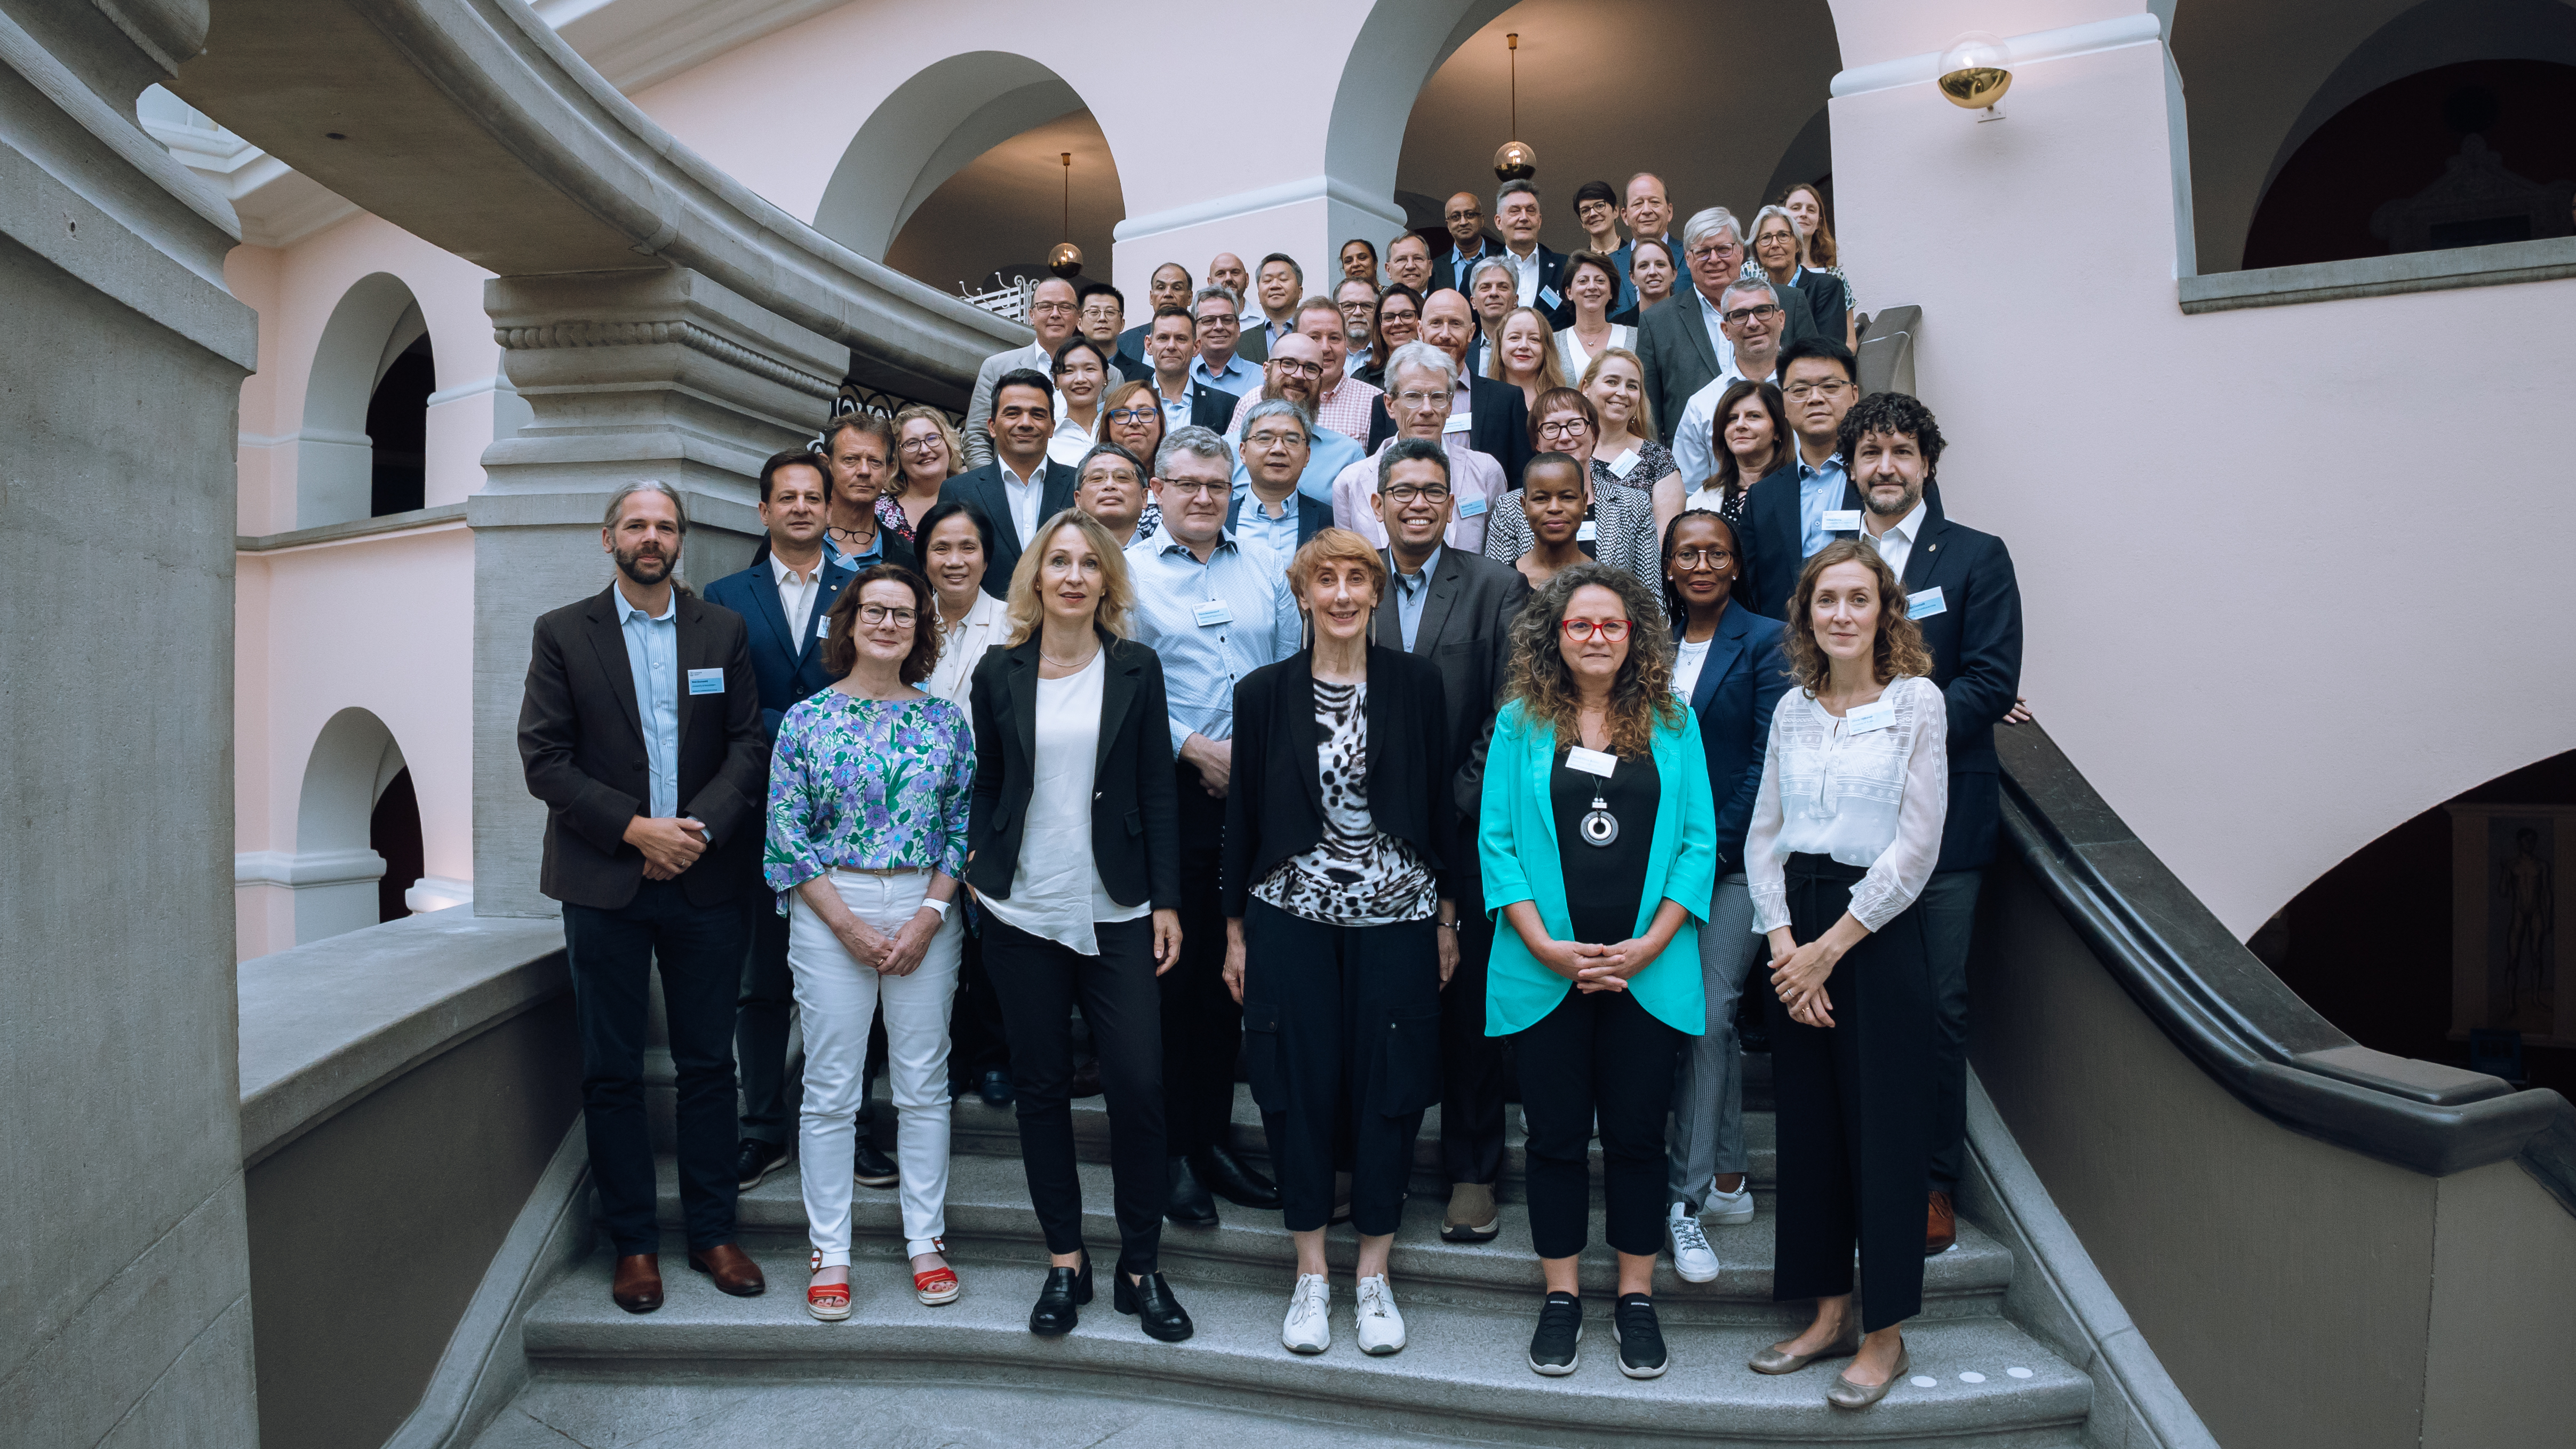 The three groups combined at the University of Zurich: The Research Leaders, the Research Collaboration Group, and the Deans and Directors of Graduate Studies